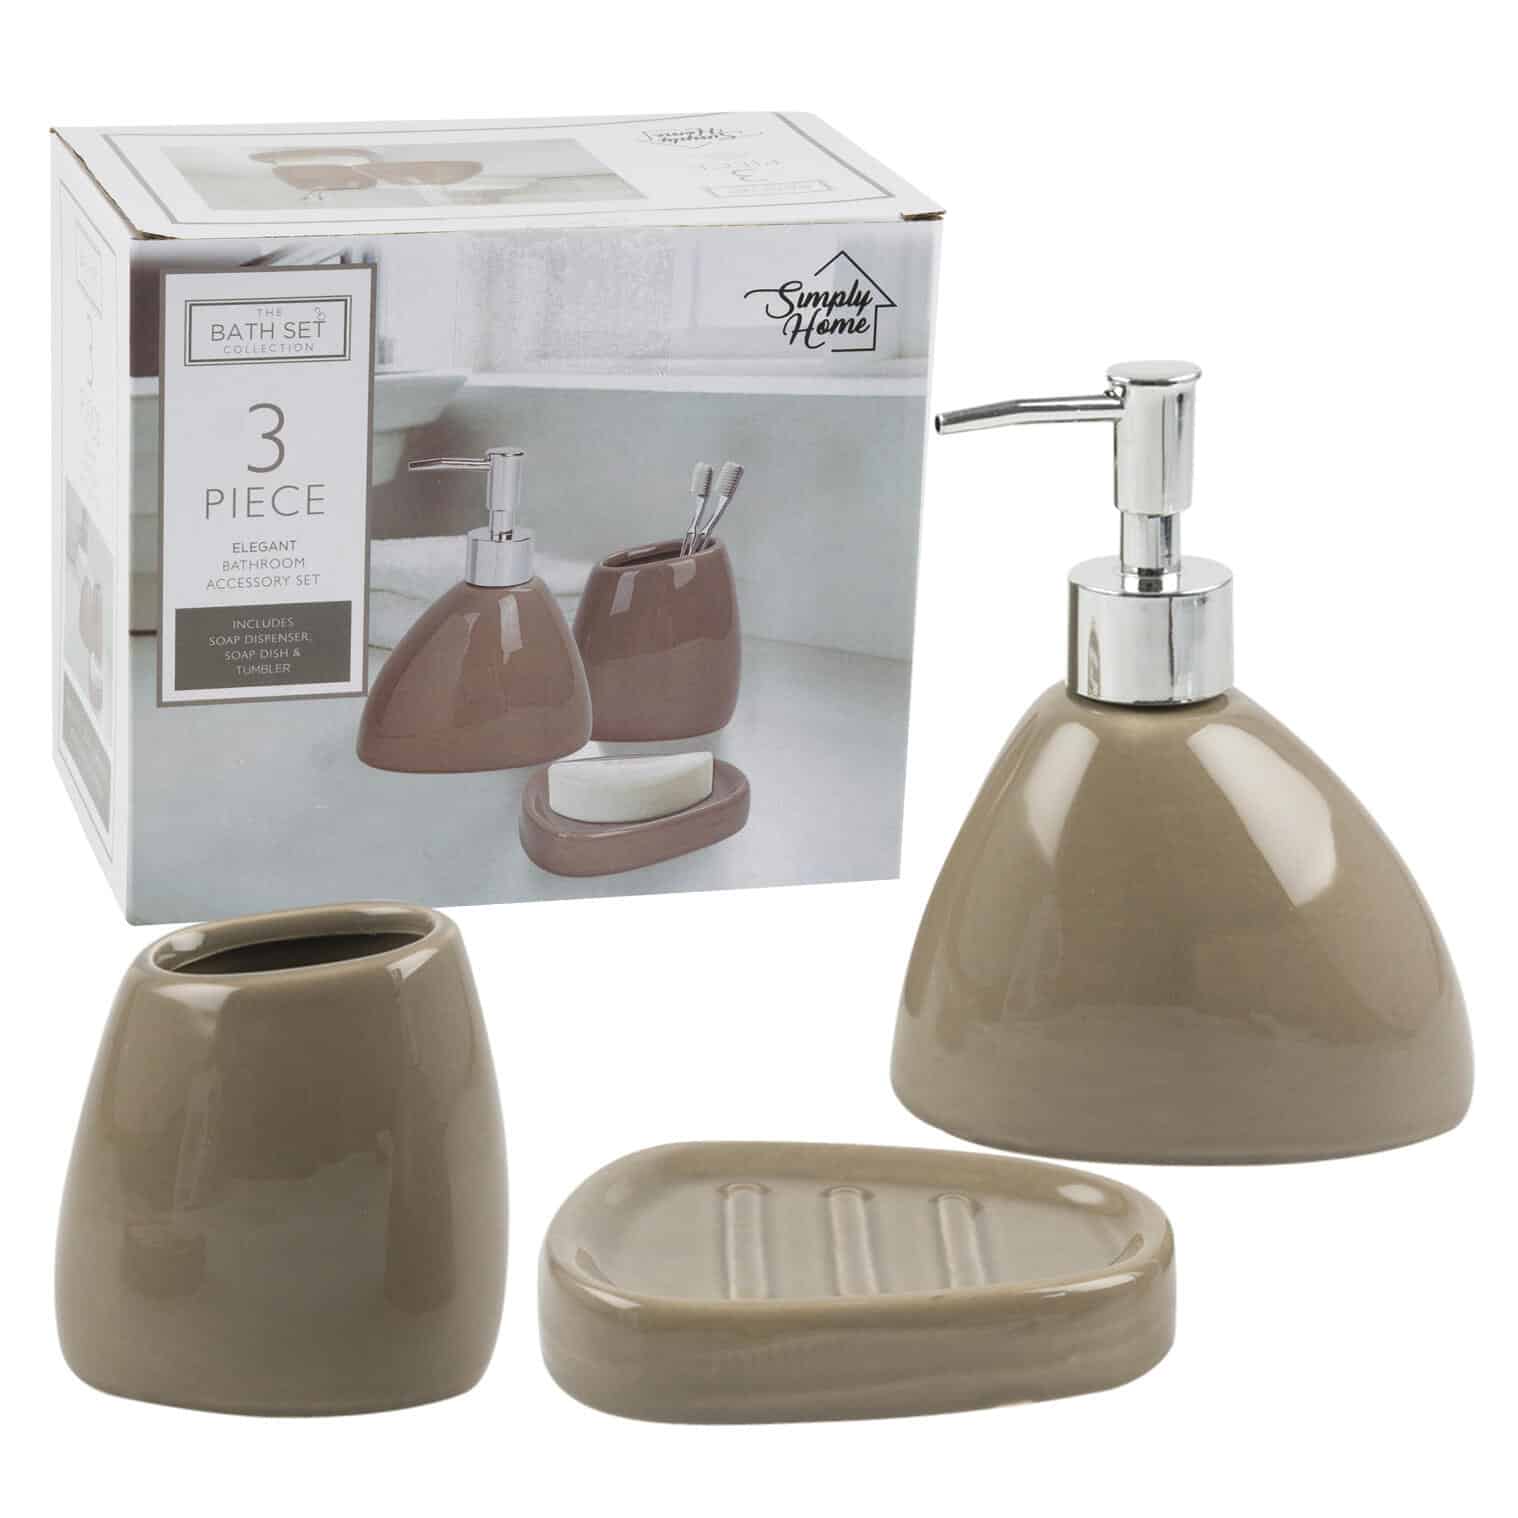 This 3 Piece Dolomite Bathroom Accessory Set Brown by Simply Home is made with love by Premier Homegoods! Shop more unique gift ideas today with Spots Initiatives, the best way to support creators.